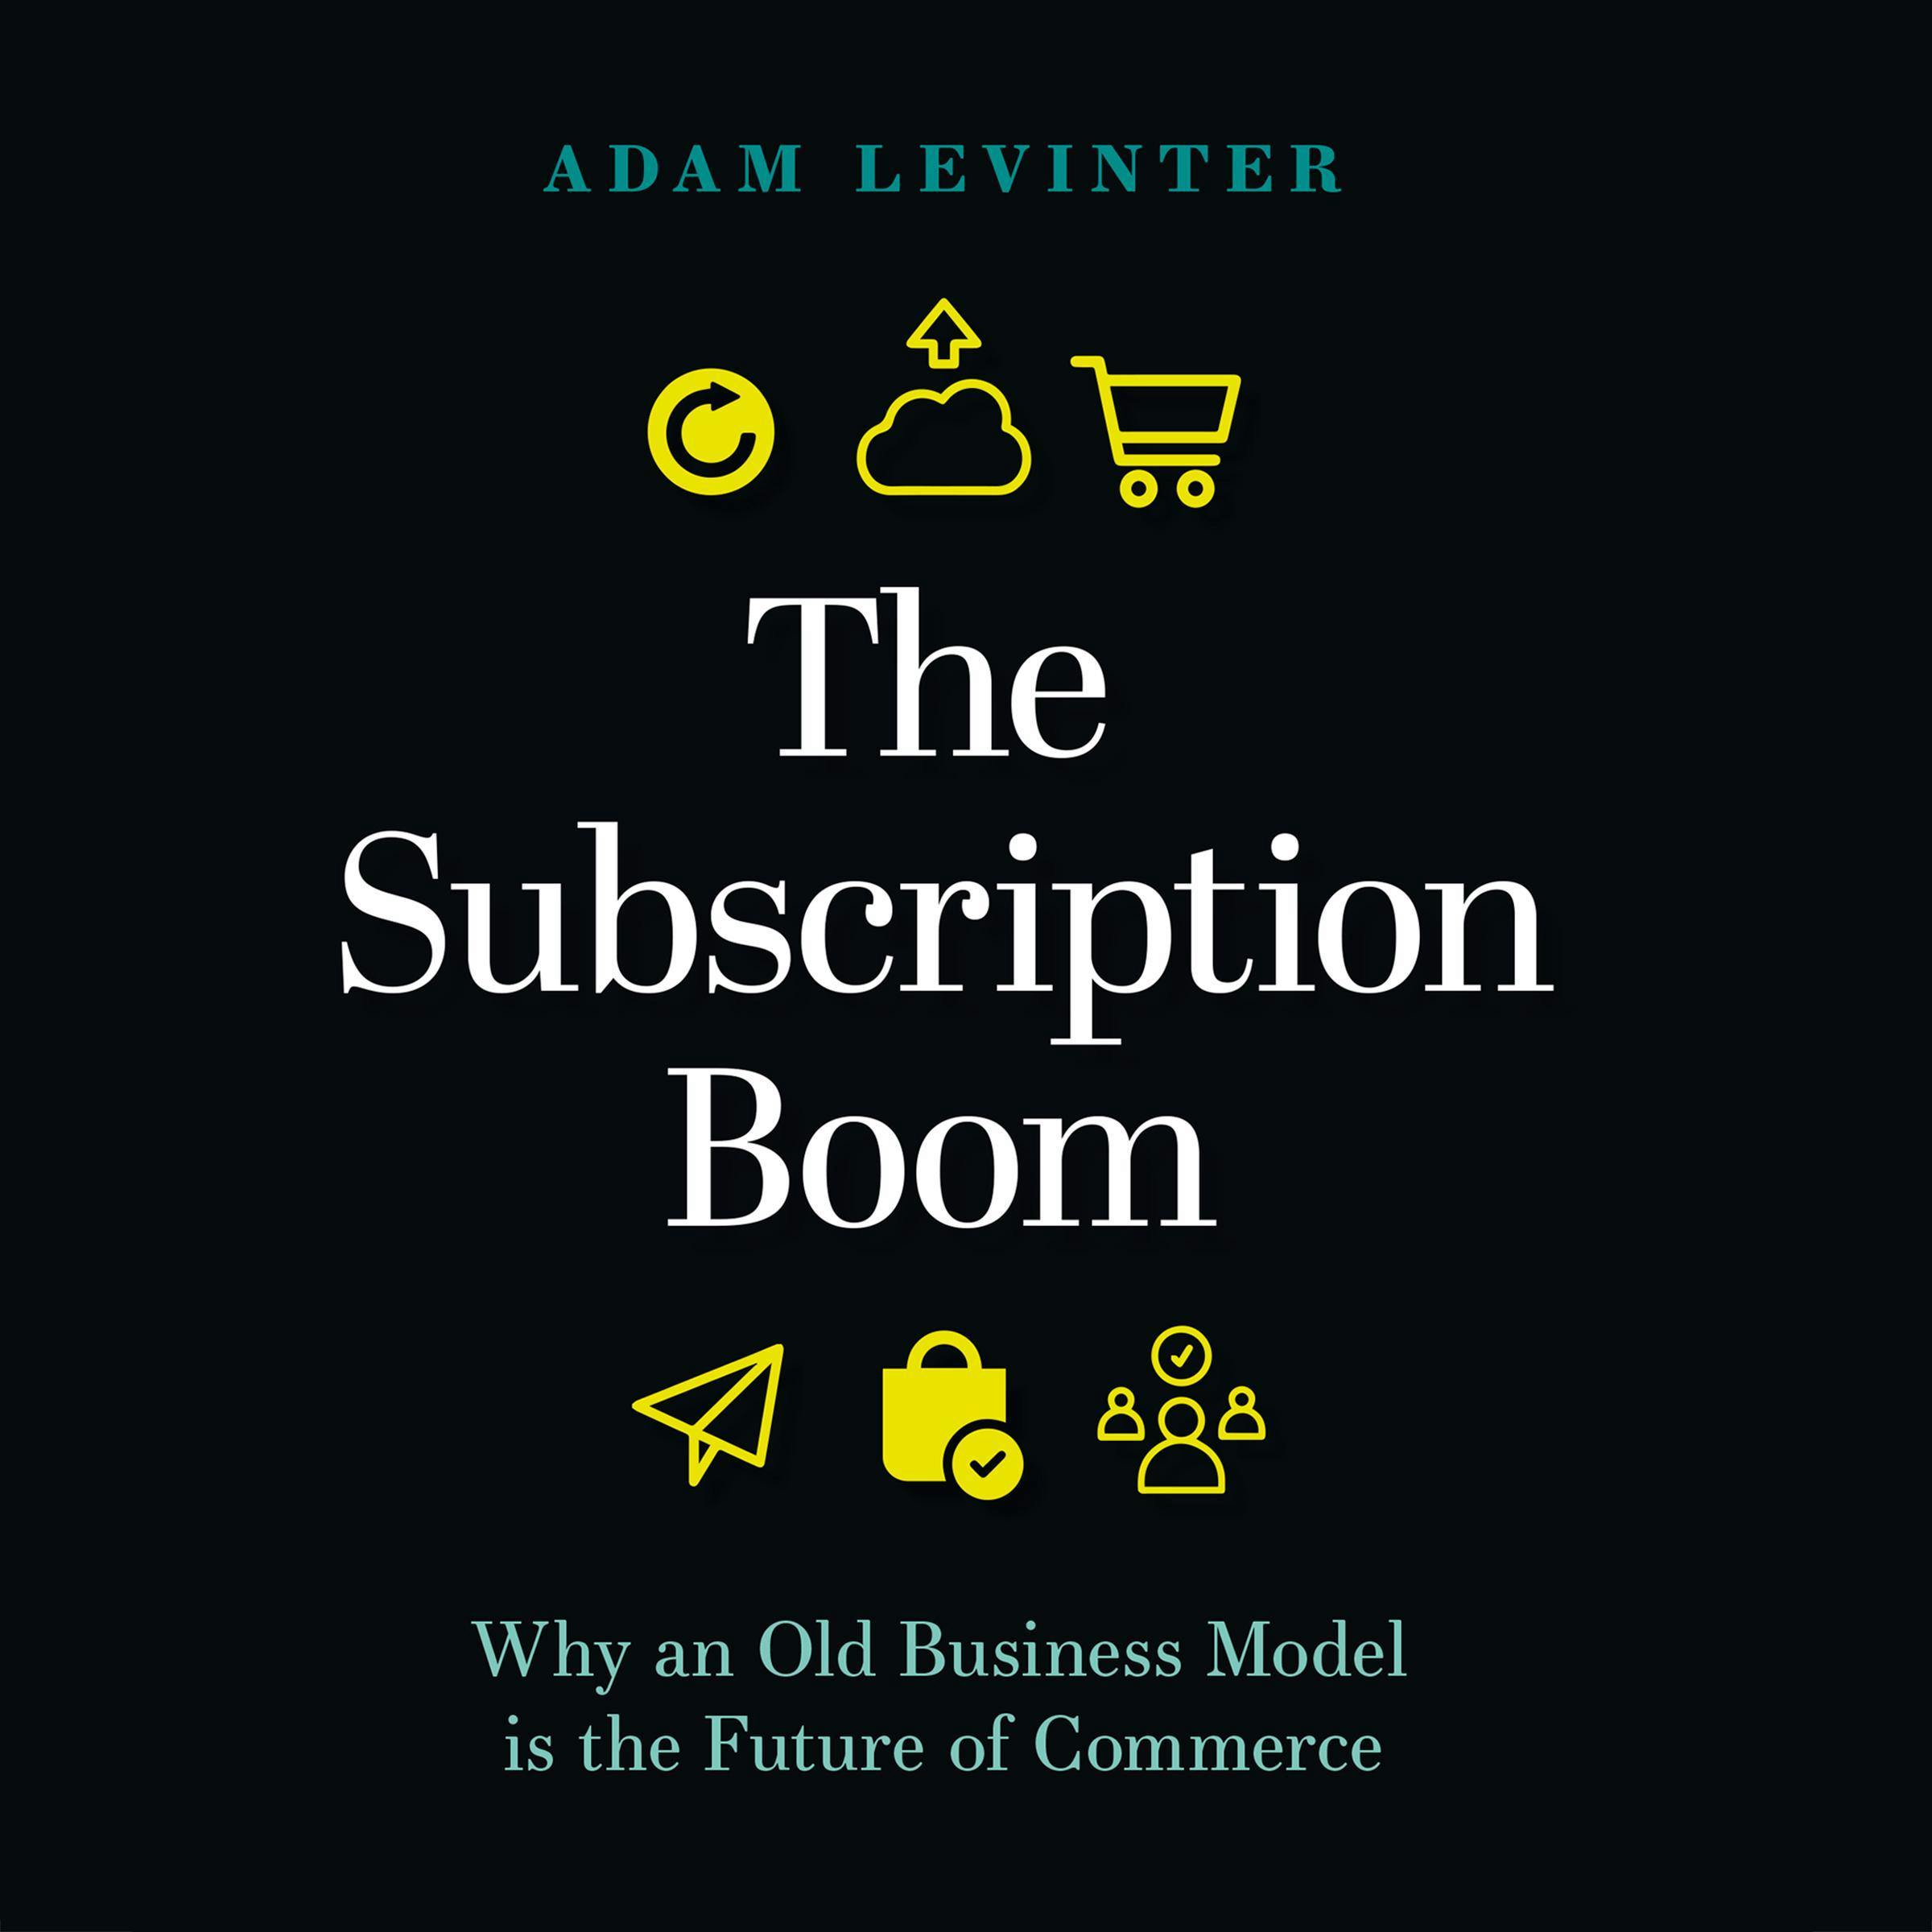 The Subscription Boom: Why an Old Business Model is the Future of Commerce - Adam Levinter